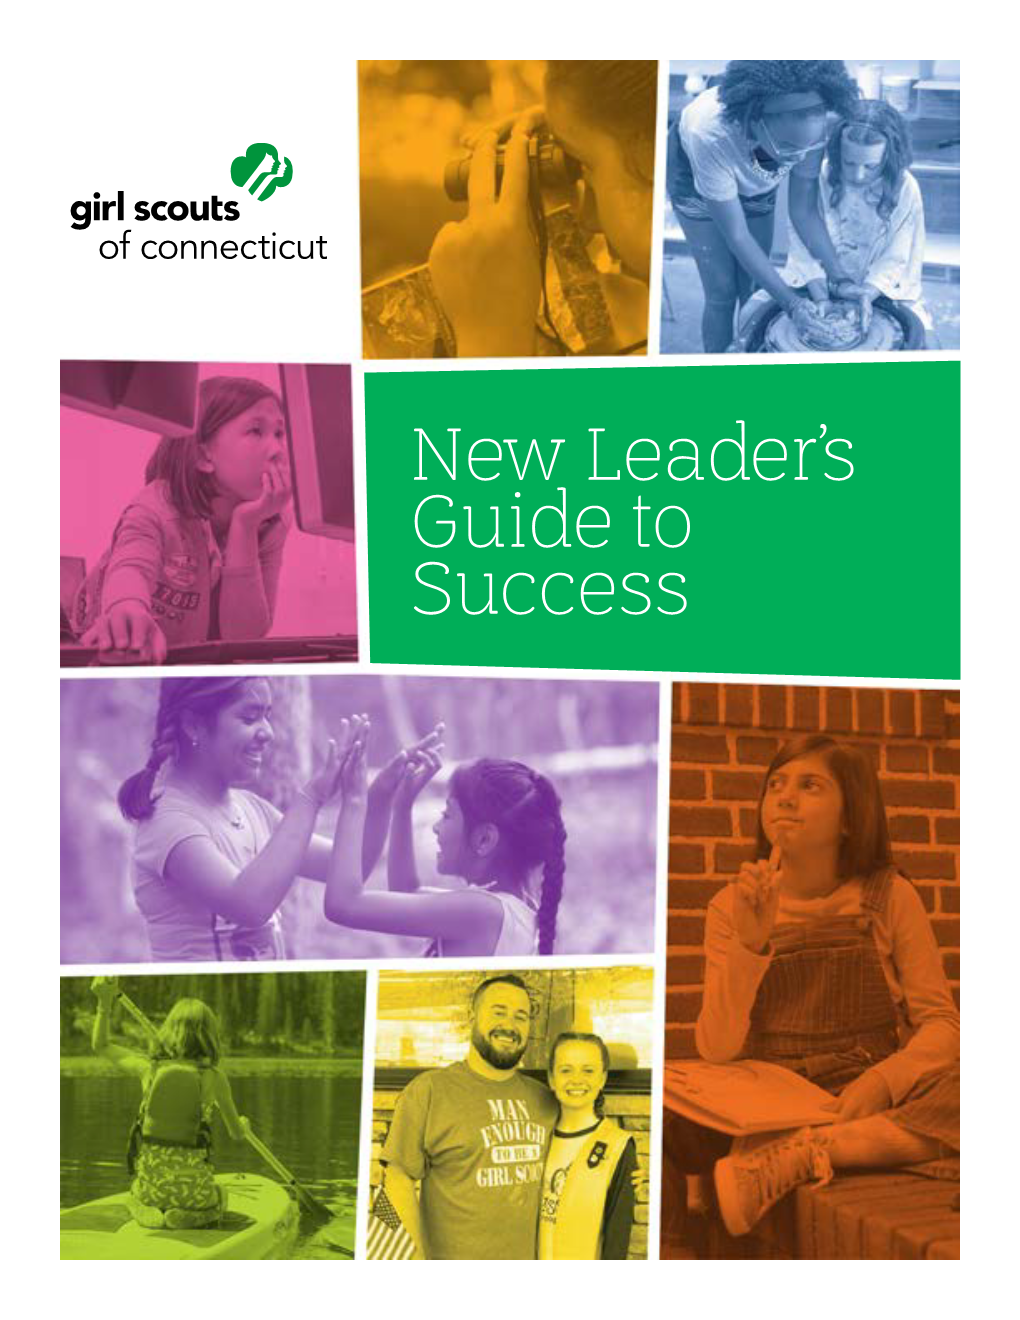 New Leader's Guide to Success